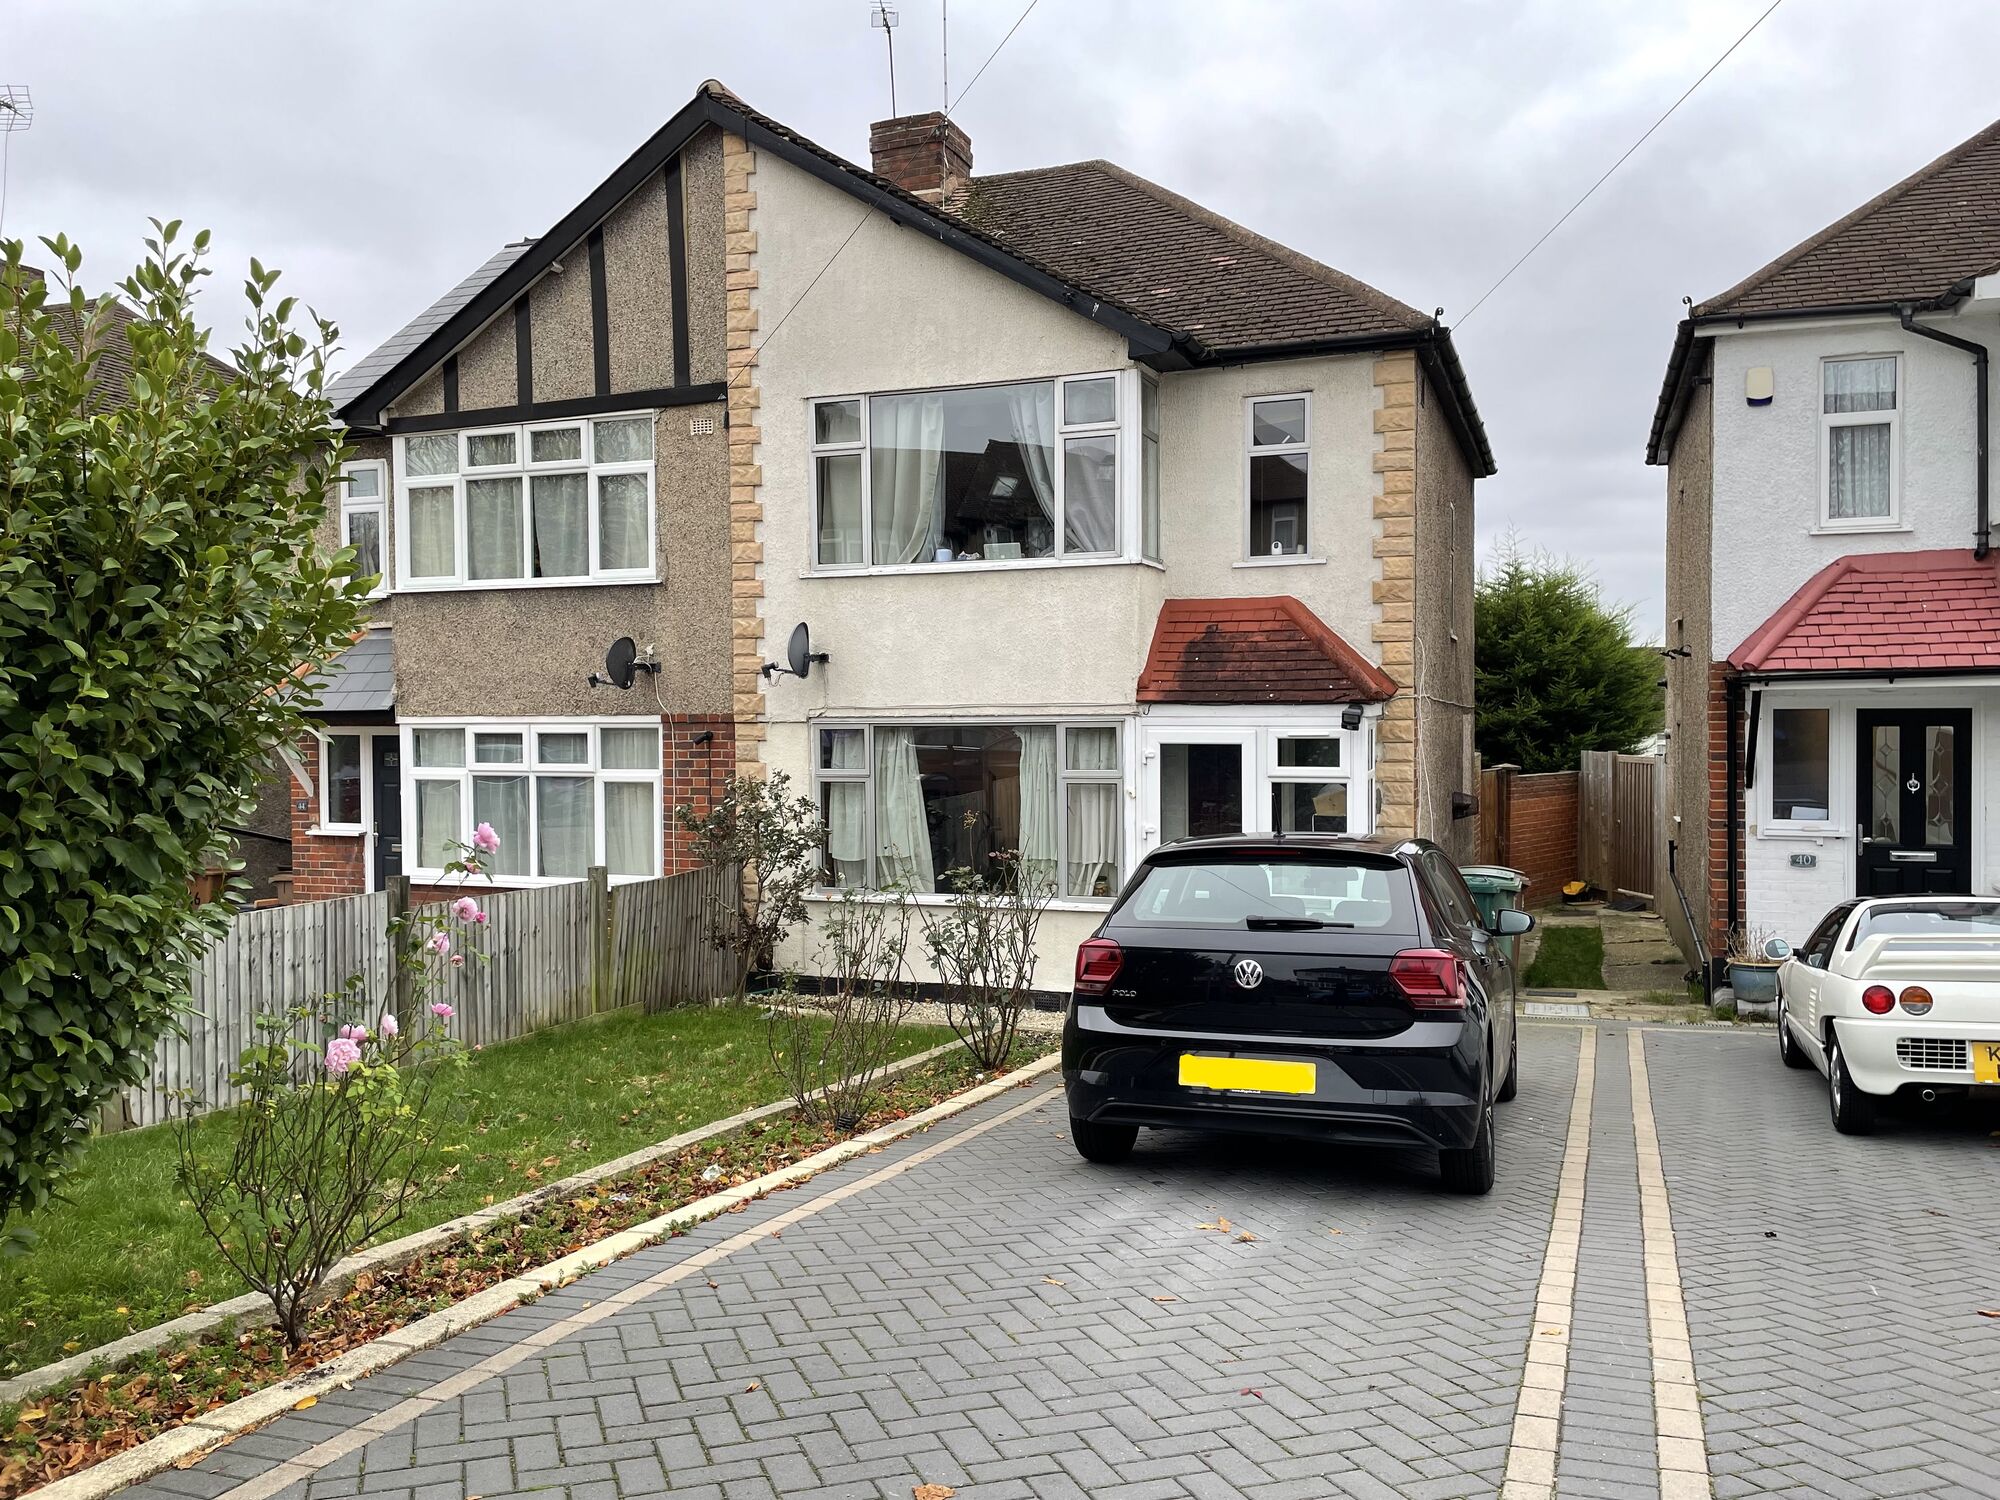 3 bedroom semi detached house to rent, Available now Dibdin Road, Sutton, SM1, main image